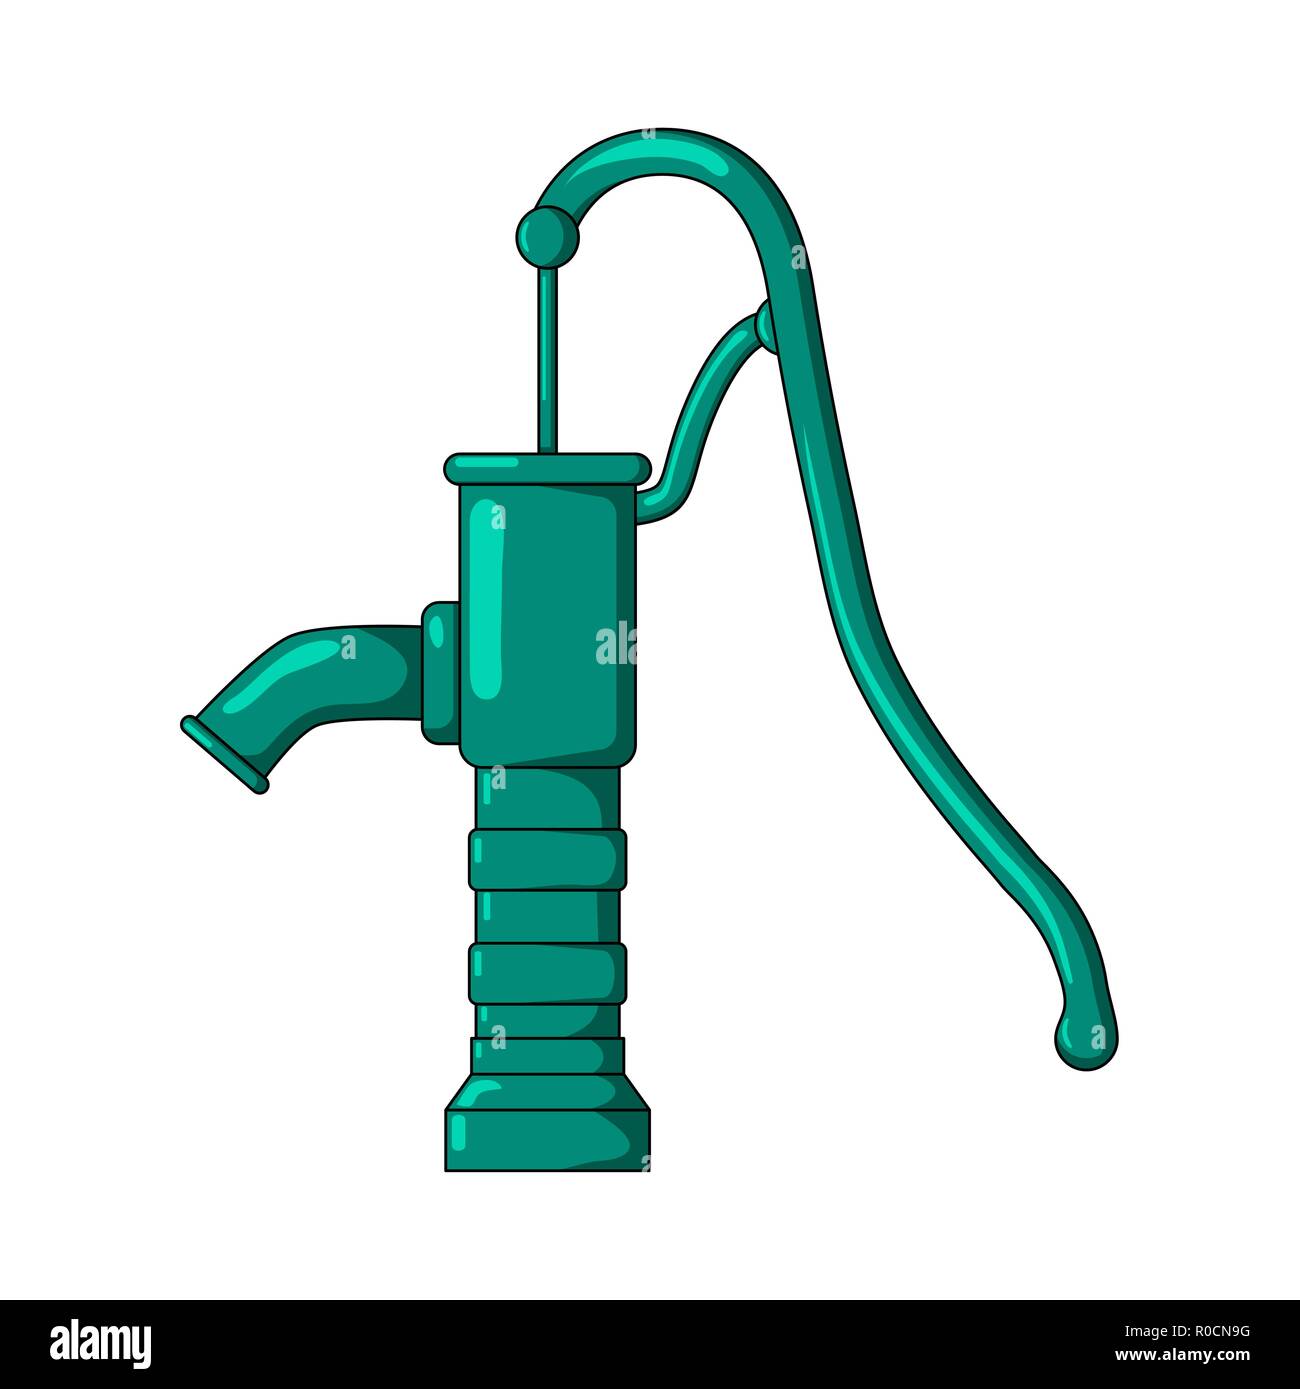 green water pump design isolated on white background Stock Vector